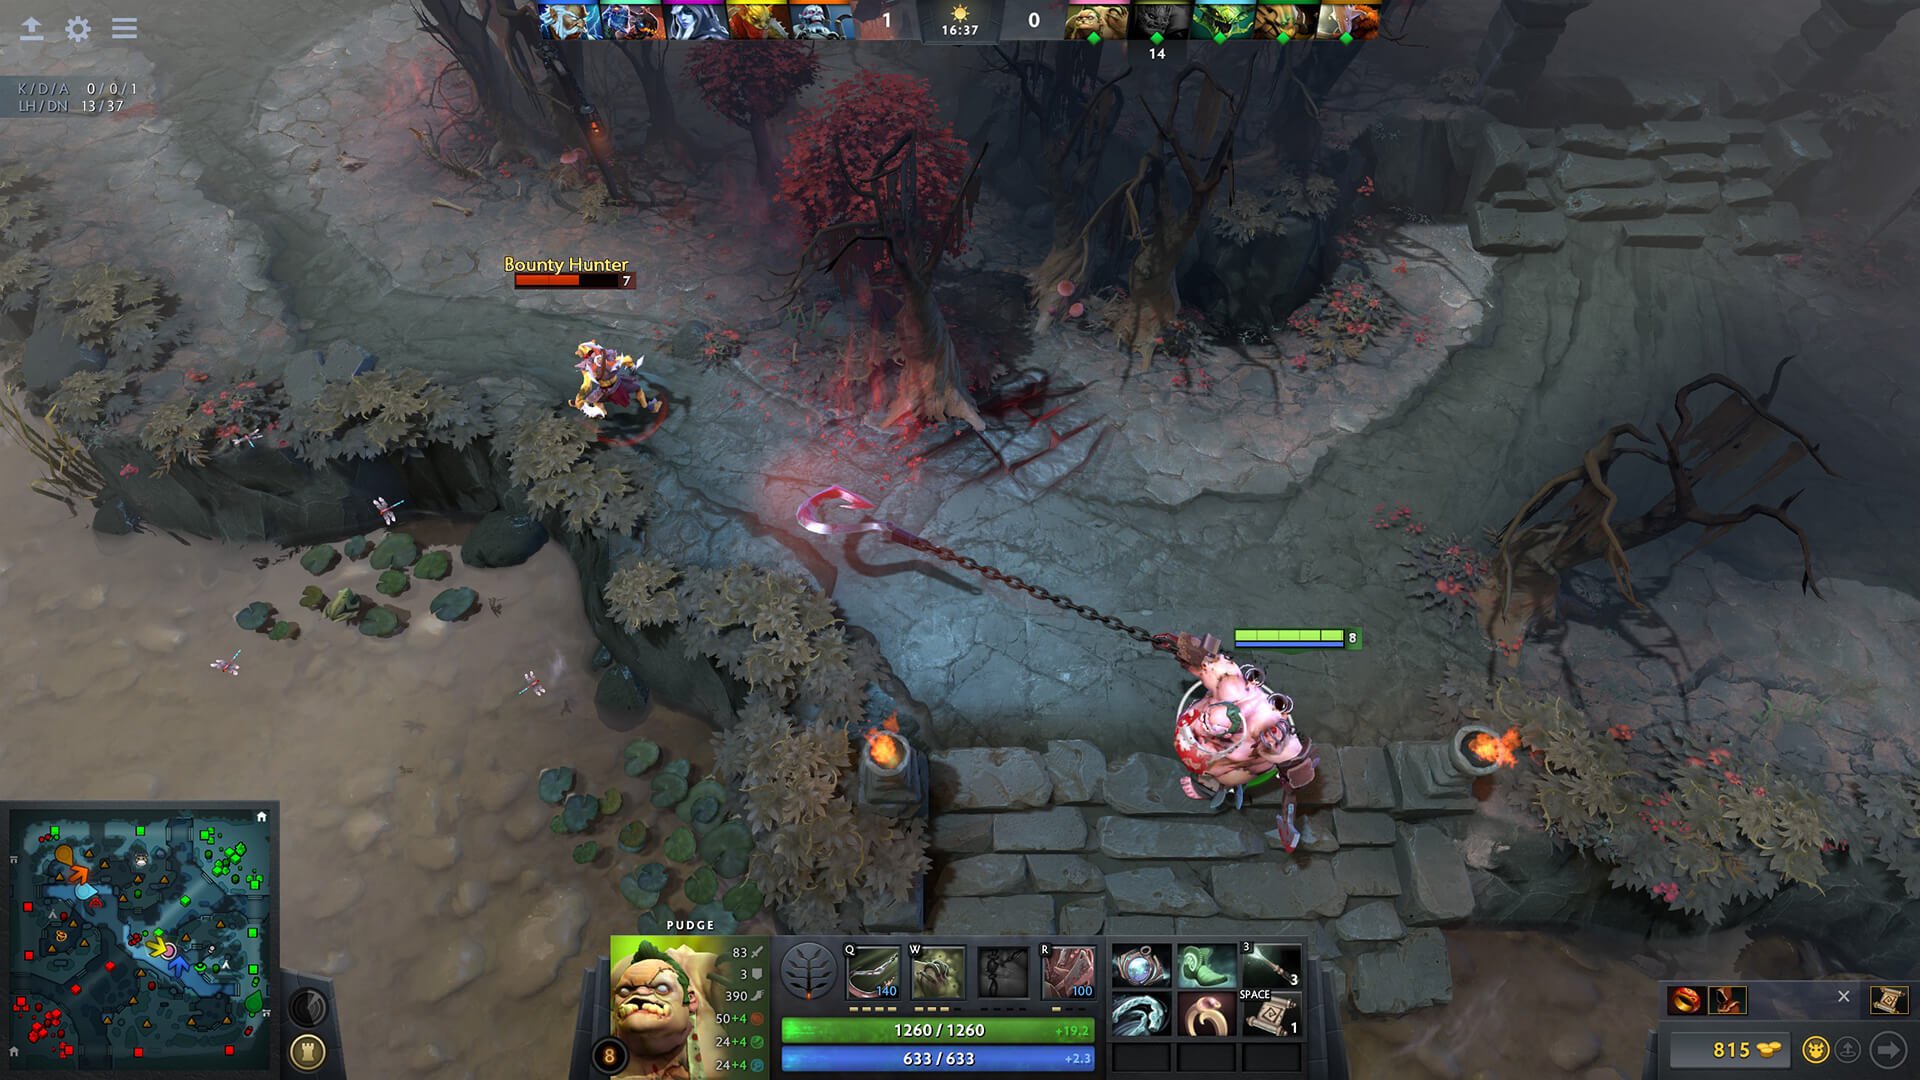 A gameplay shot of Dota 2, which is an esports game played in China (although not its most popular)